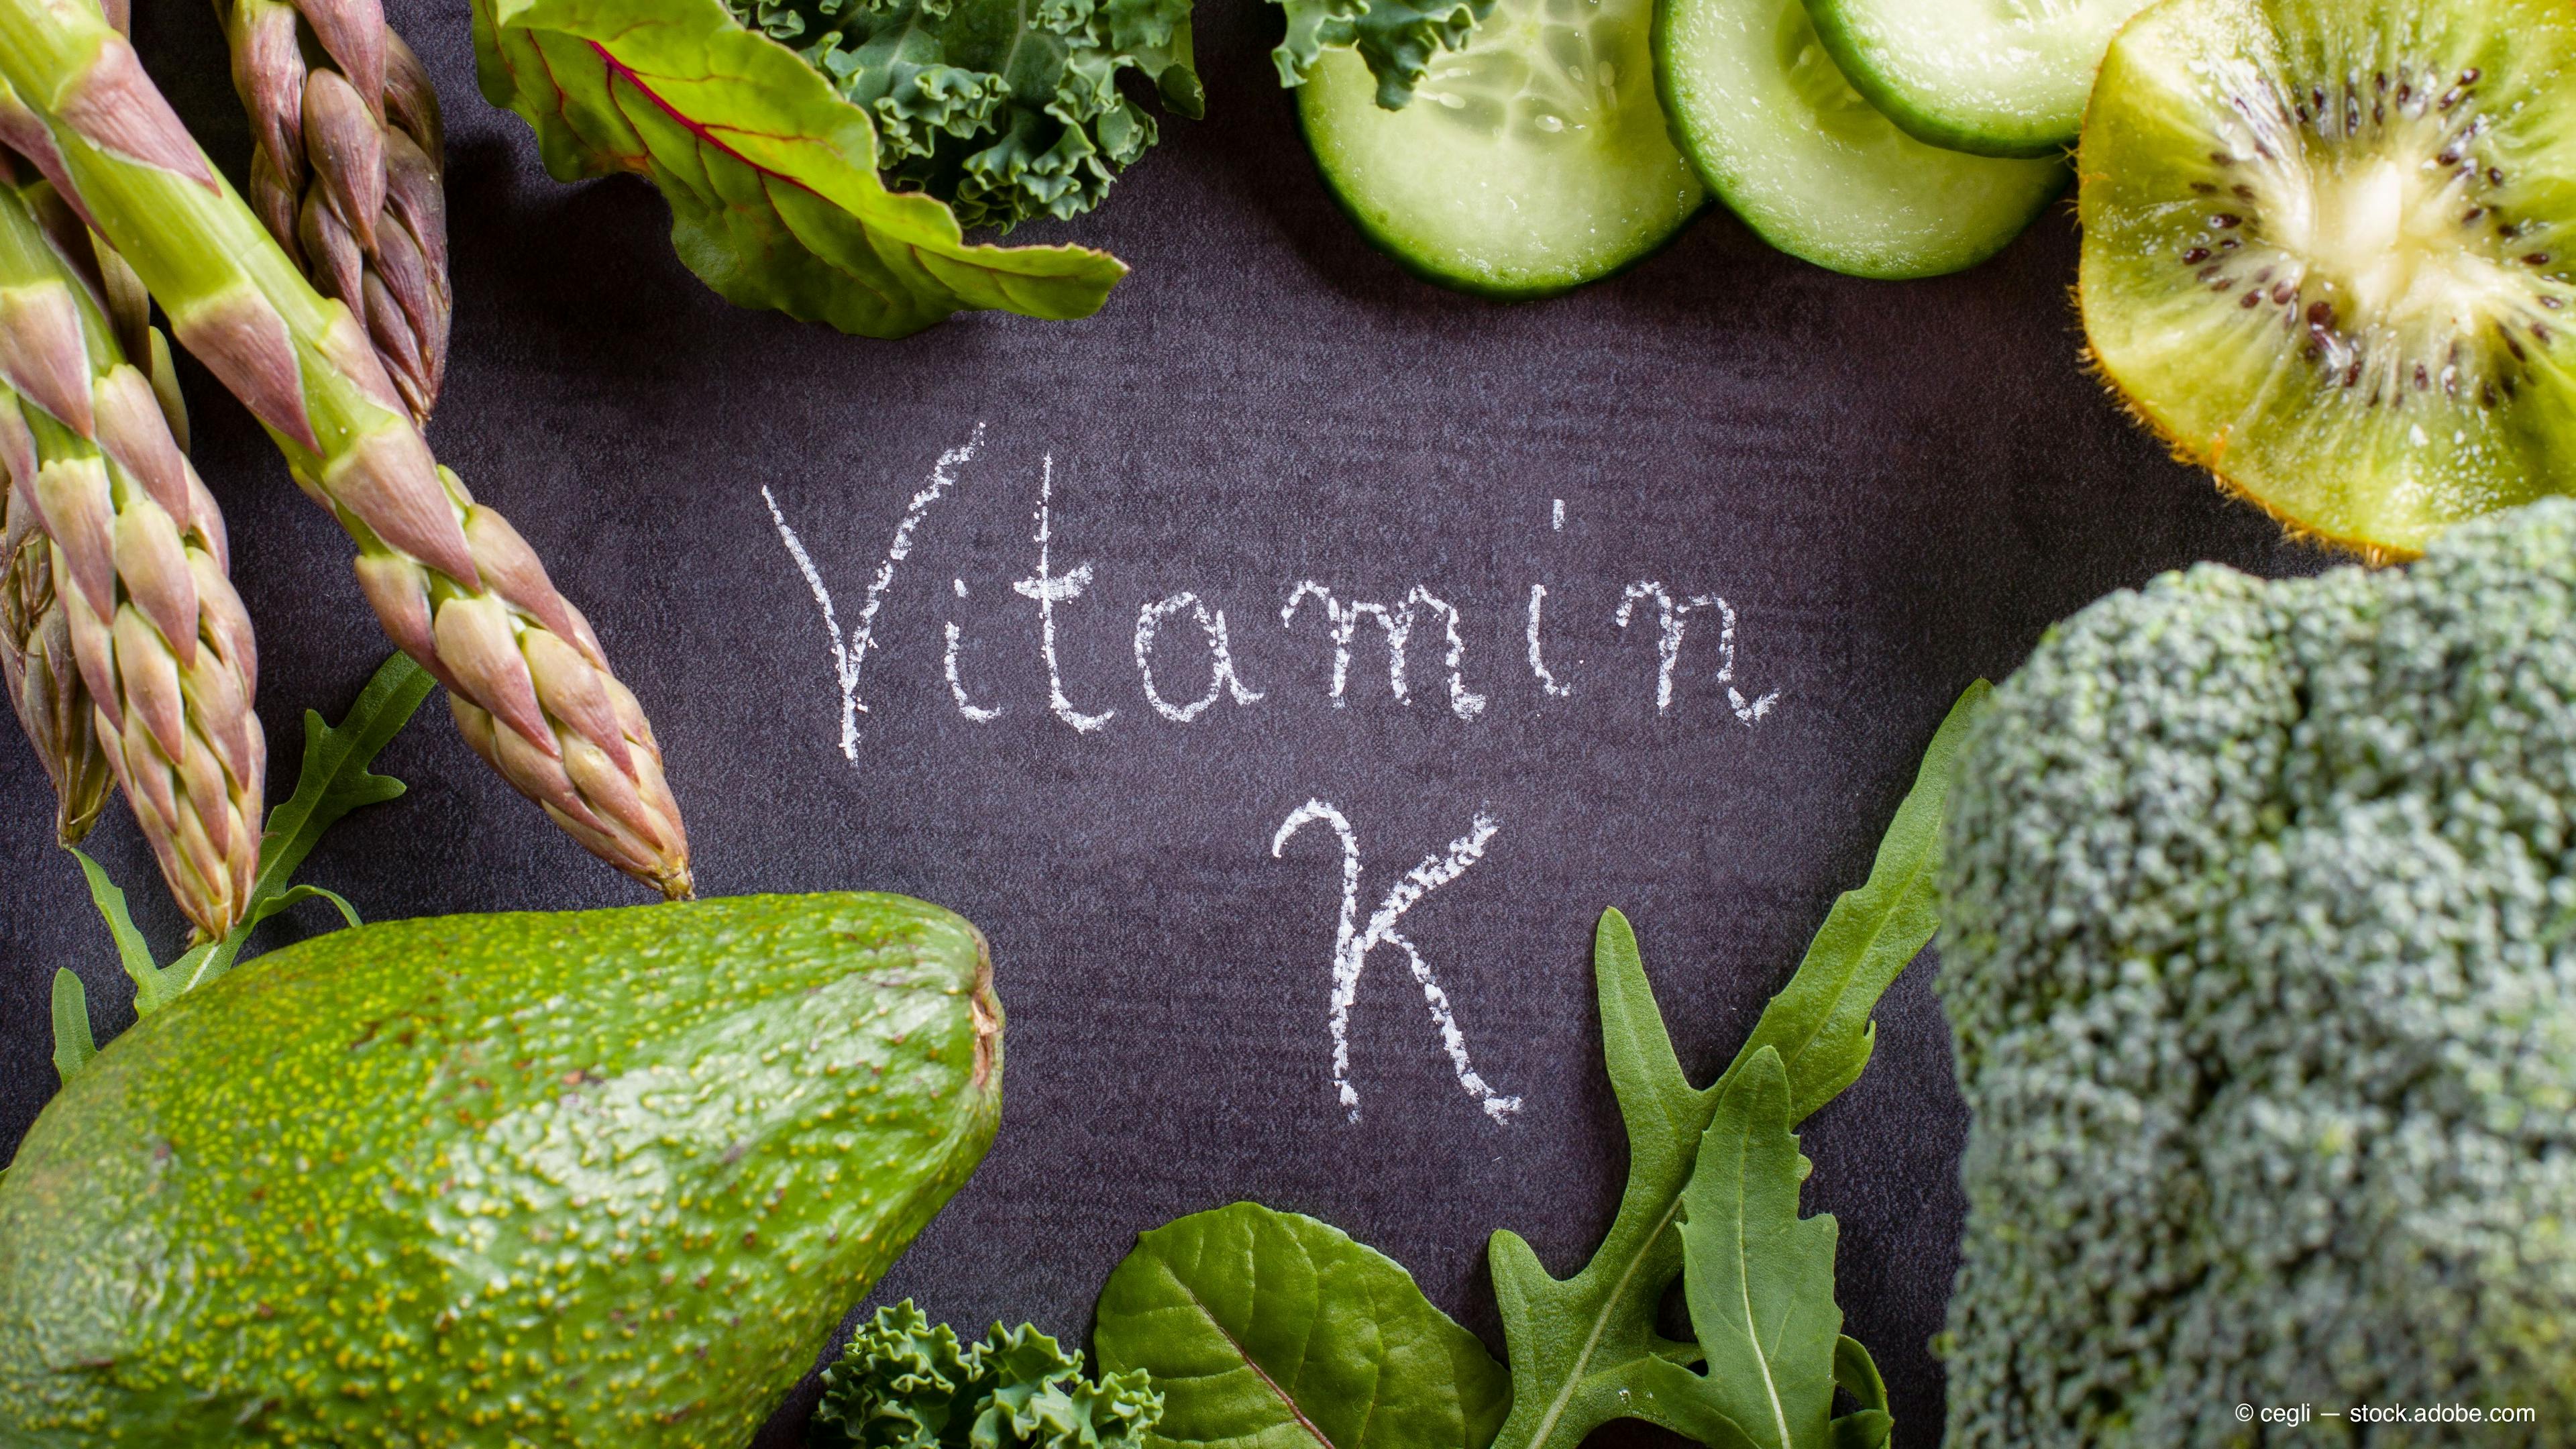 Consider the underrated significance of vitamin K2 in eye care